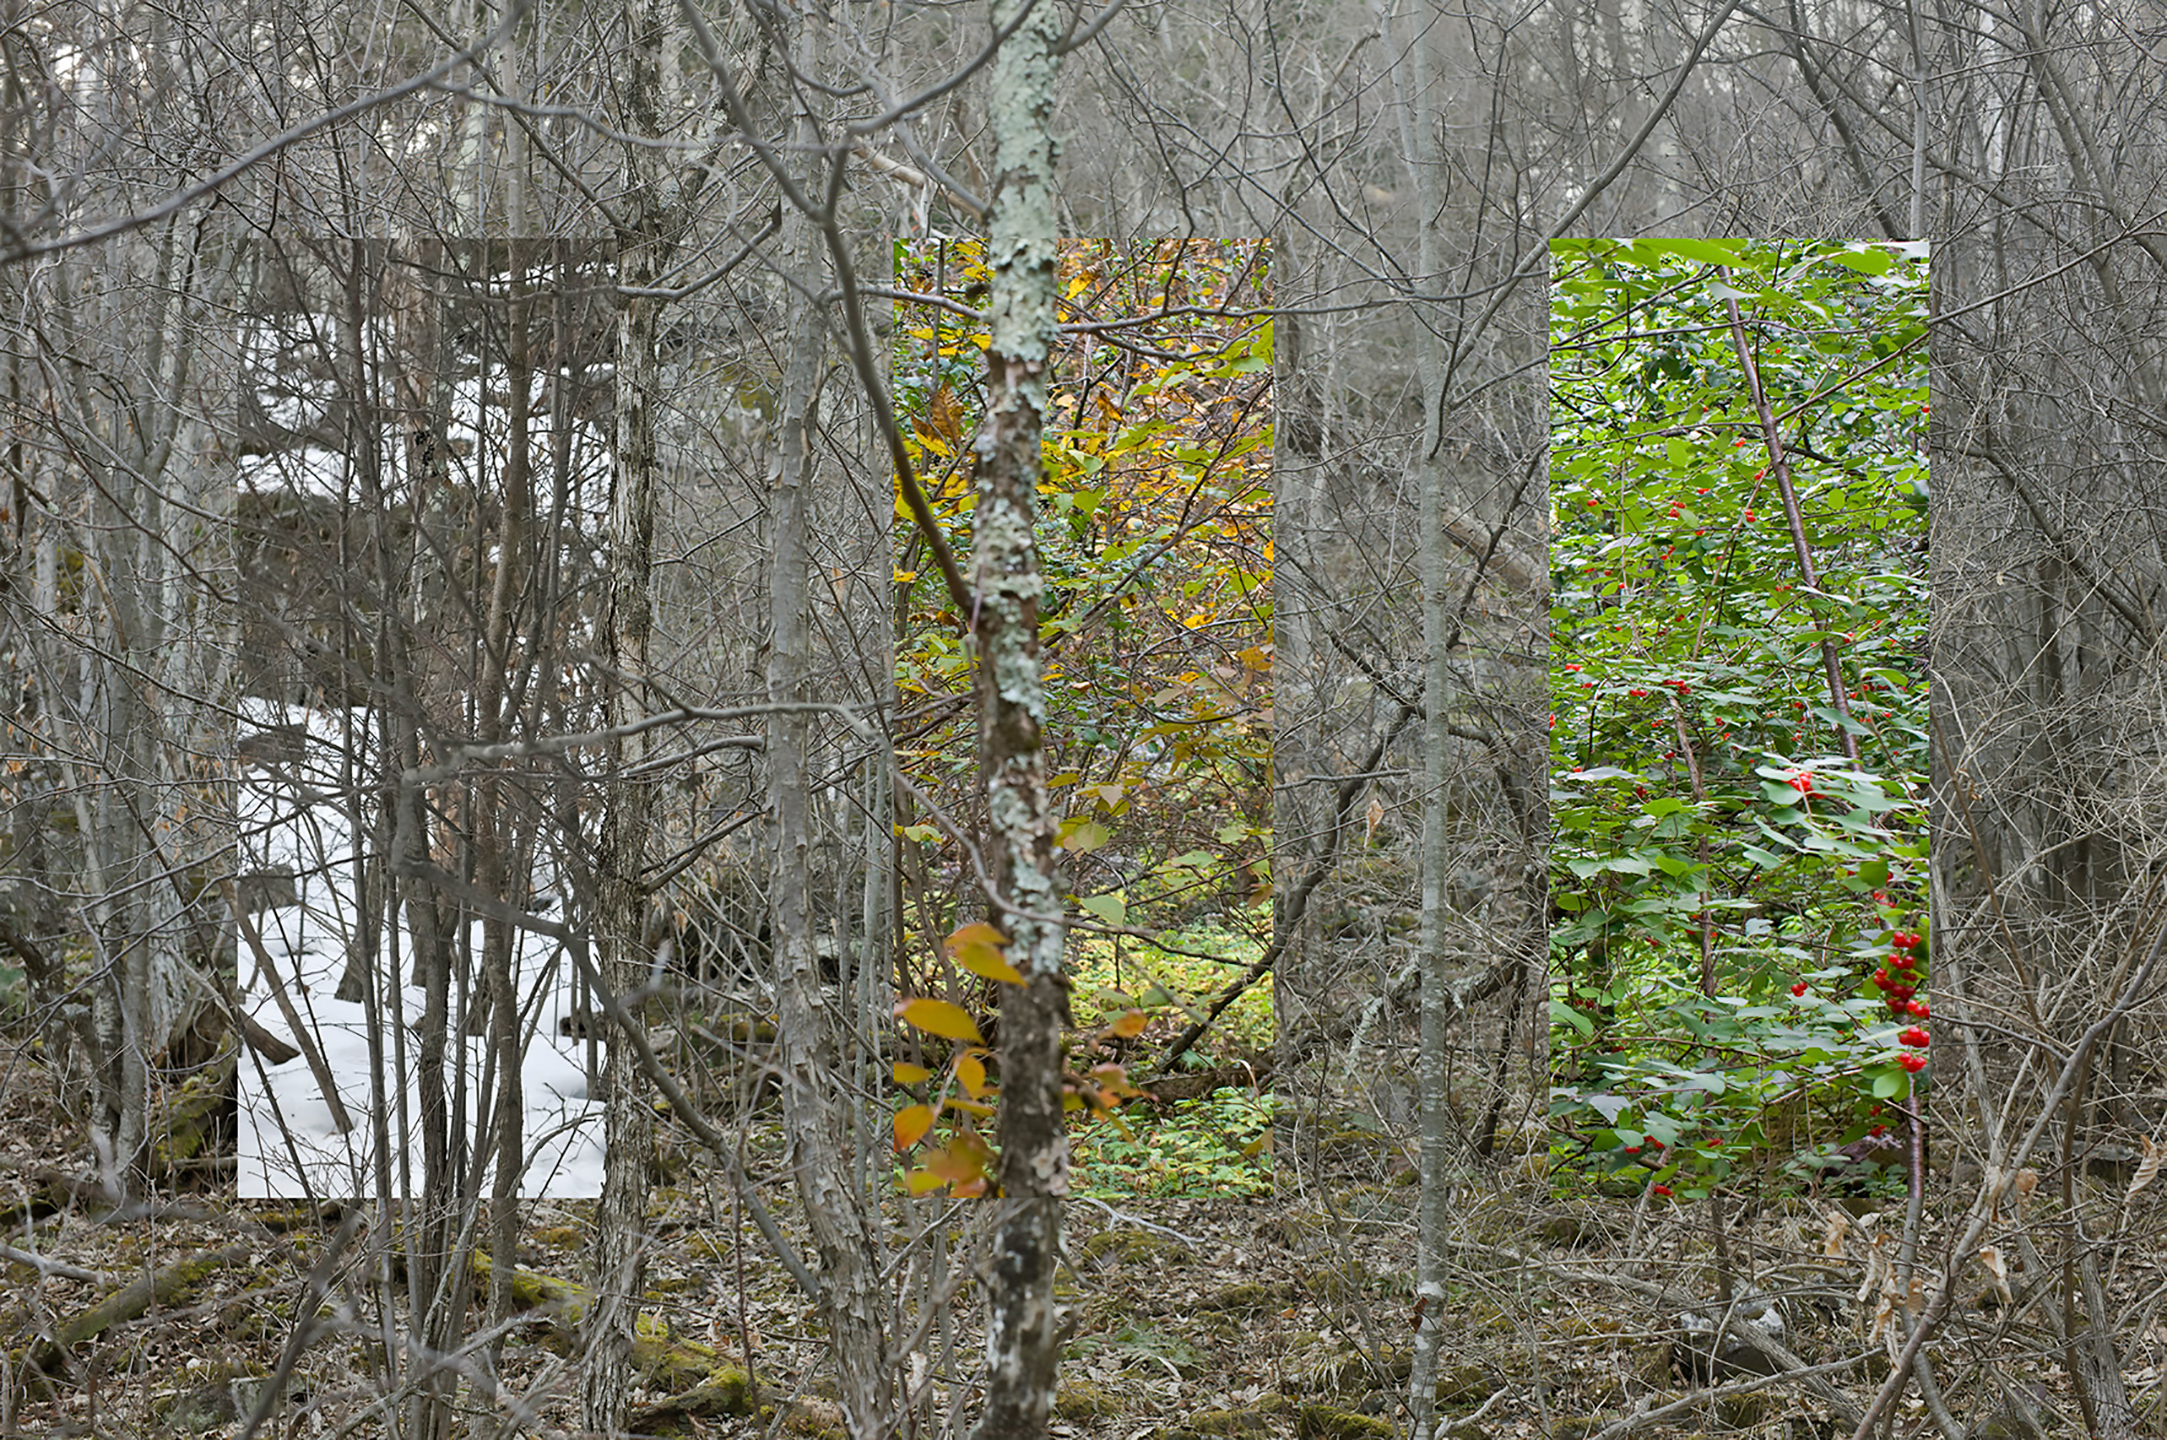 "Time composite" looking through thicket in the woods.